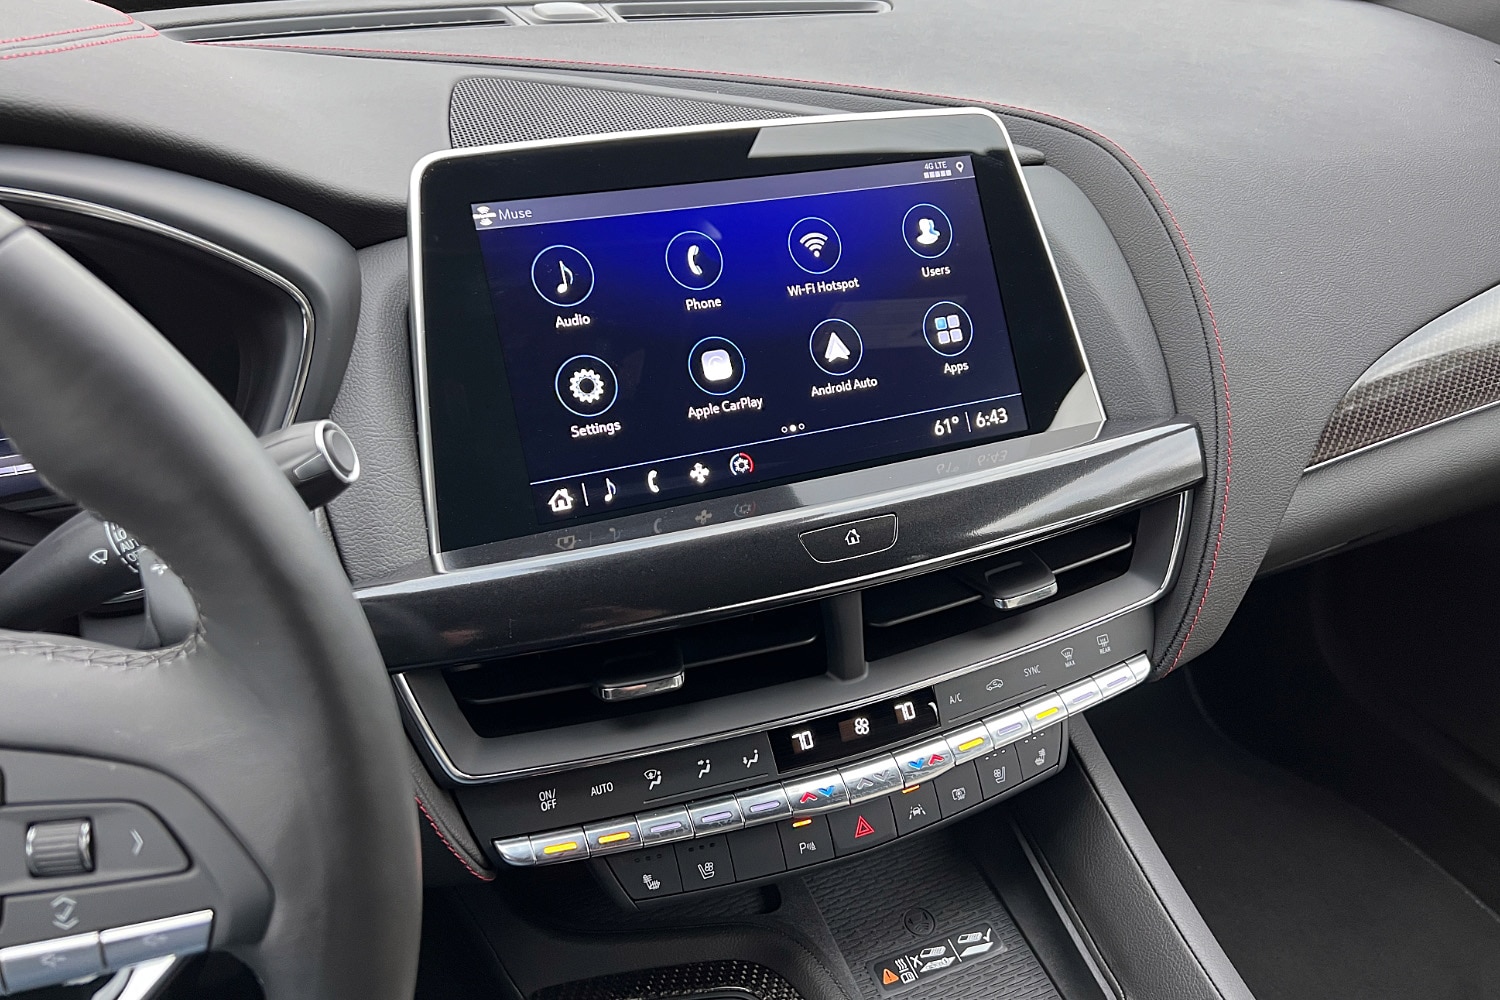 The central infotainment screen of the 2023 Cadillac CT5-V